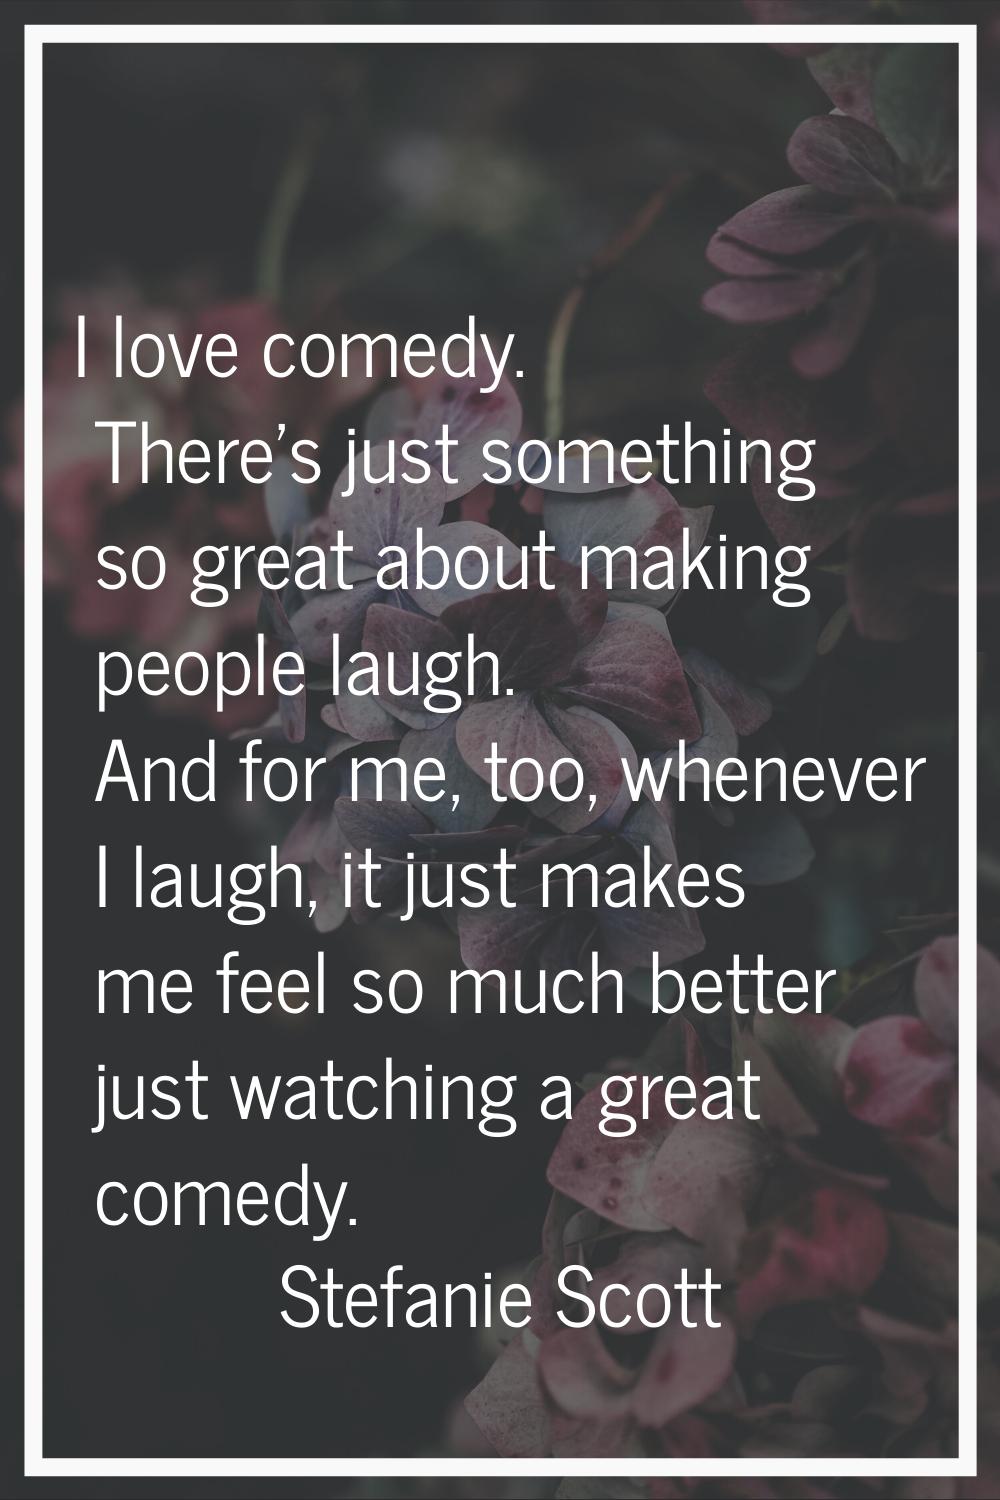 I love comedy. There's just something so great about making people laugh. And for me, too, whenever